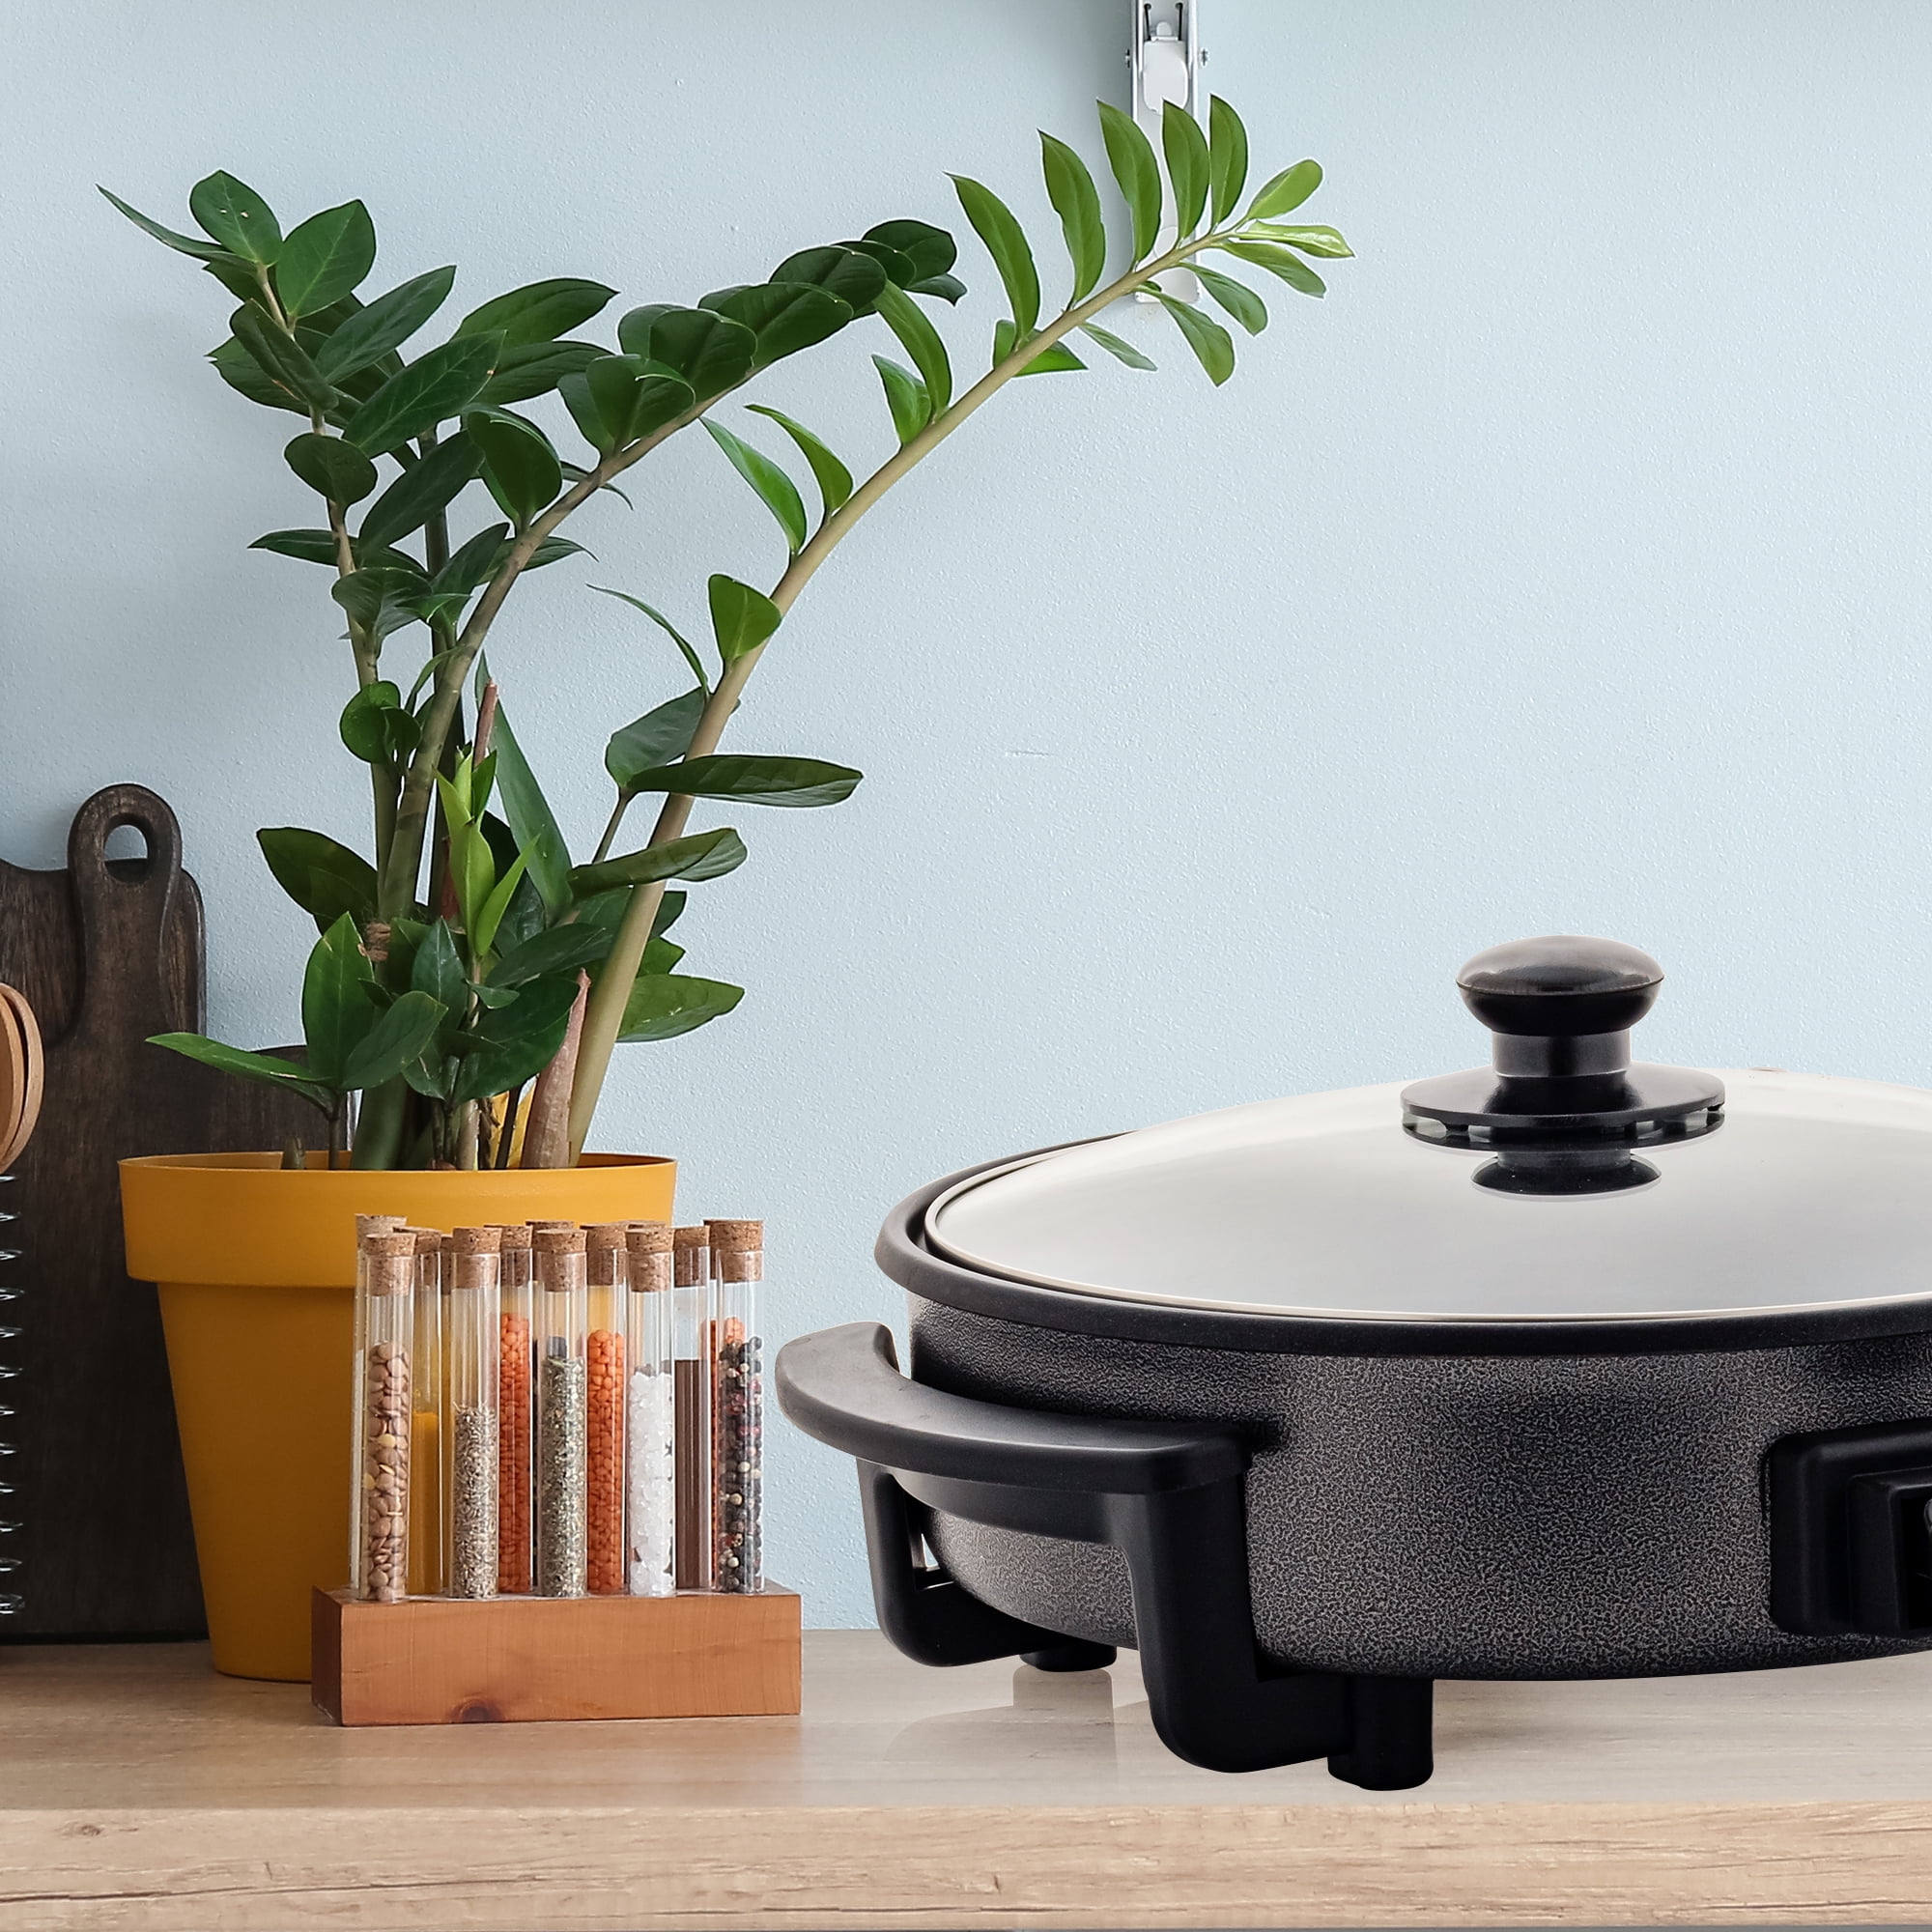 Electric Skillet With Nonstick Coating And Glass Lid, 12 Inch Portable  Kitchen Countertop Cooking Pan, Adjustable Temperature Control, Cool From  Xuwangapls, $23.78